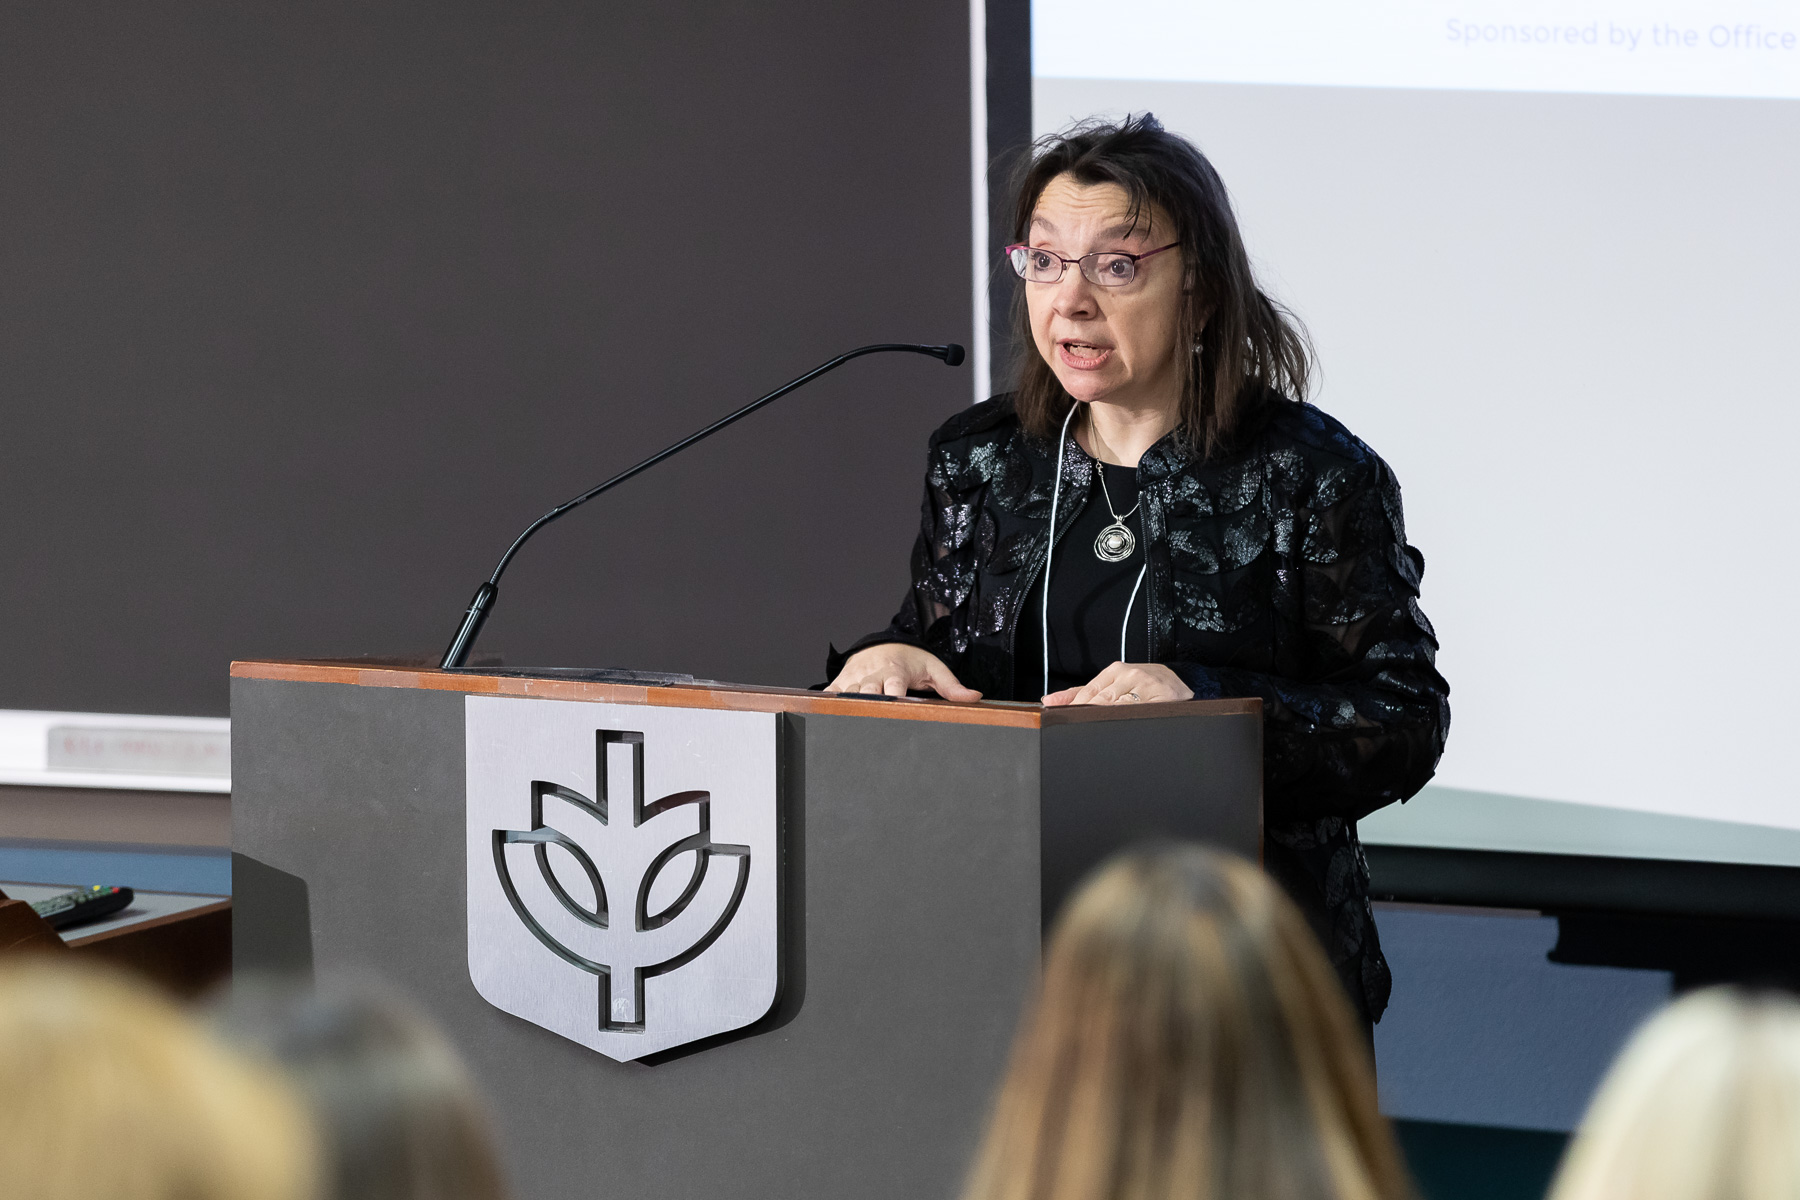 Daniela Stan Raicu, professor and associate provost for research and member of the organizing committee, also made remarks welcoming attendees. Innovation Day was focused on featuring Academic Growth and Innovation Fund (AGIF) projects. (DePaul University/Jeff Carrion)